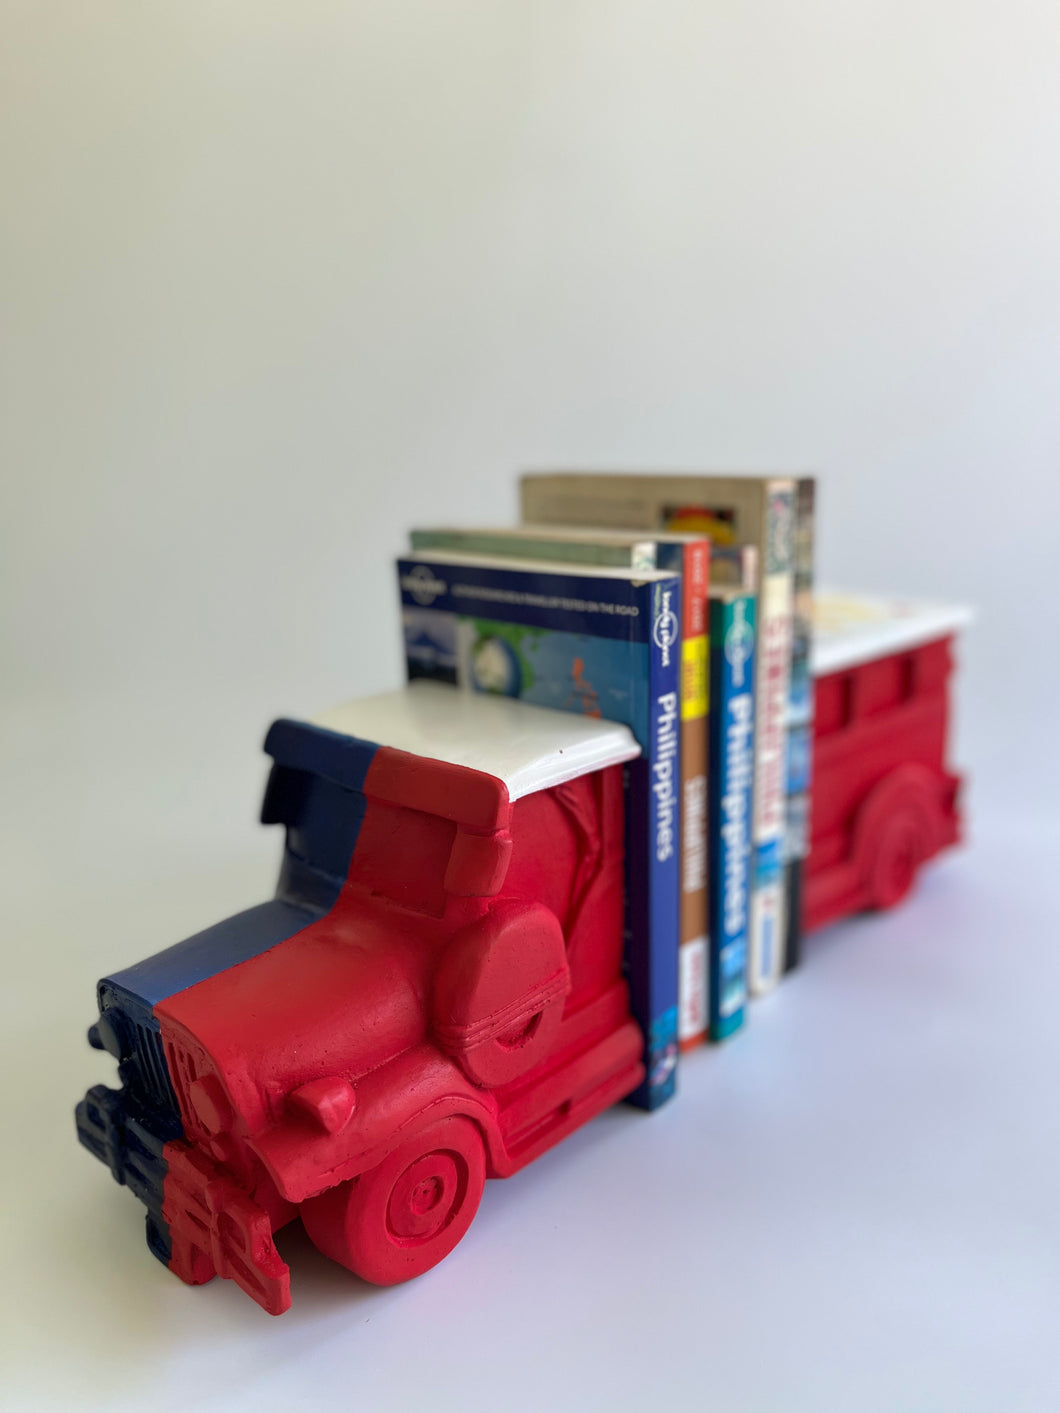 PH jeepney bookends